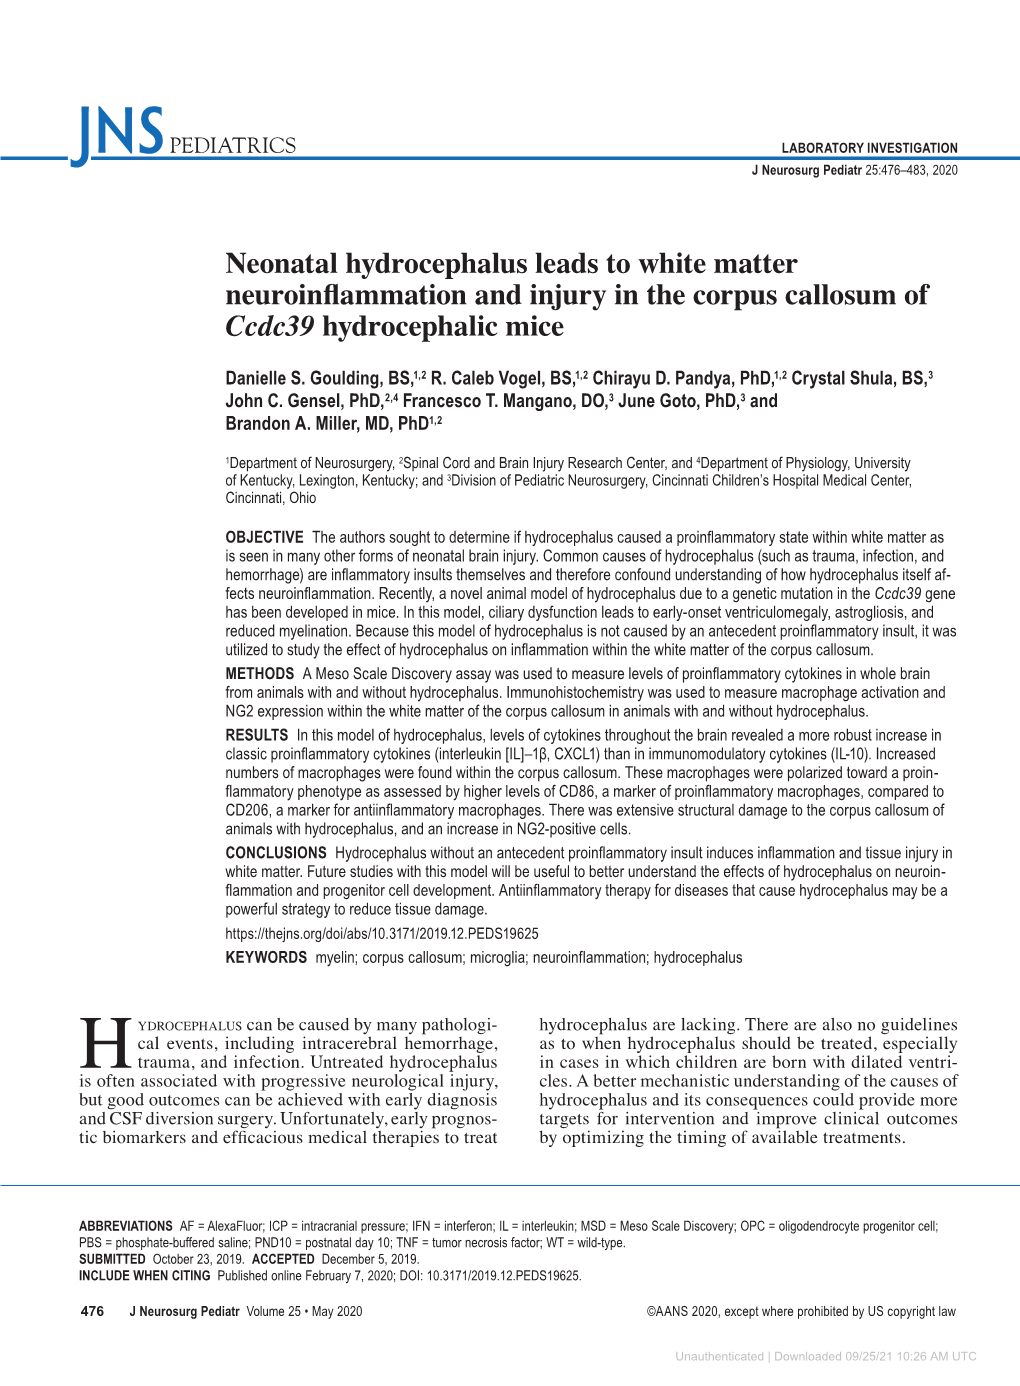 Neonatal Hydrocephalus Leads to White Matter Neuroinflammation and Injury in the Corpus Callosum of Ccdc39 Hydrocephalic Mice